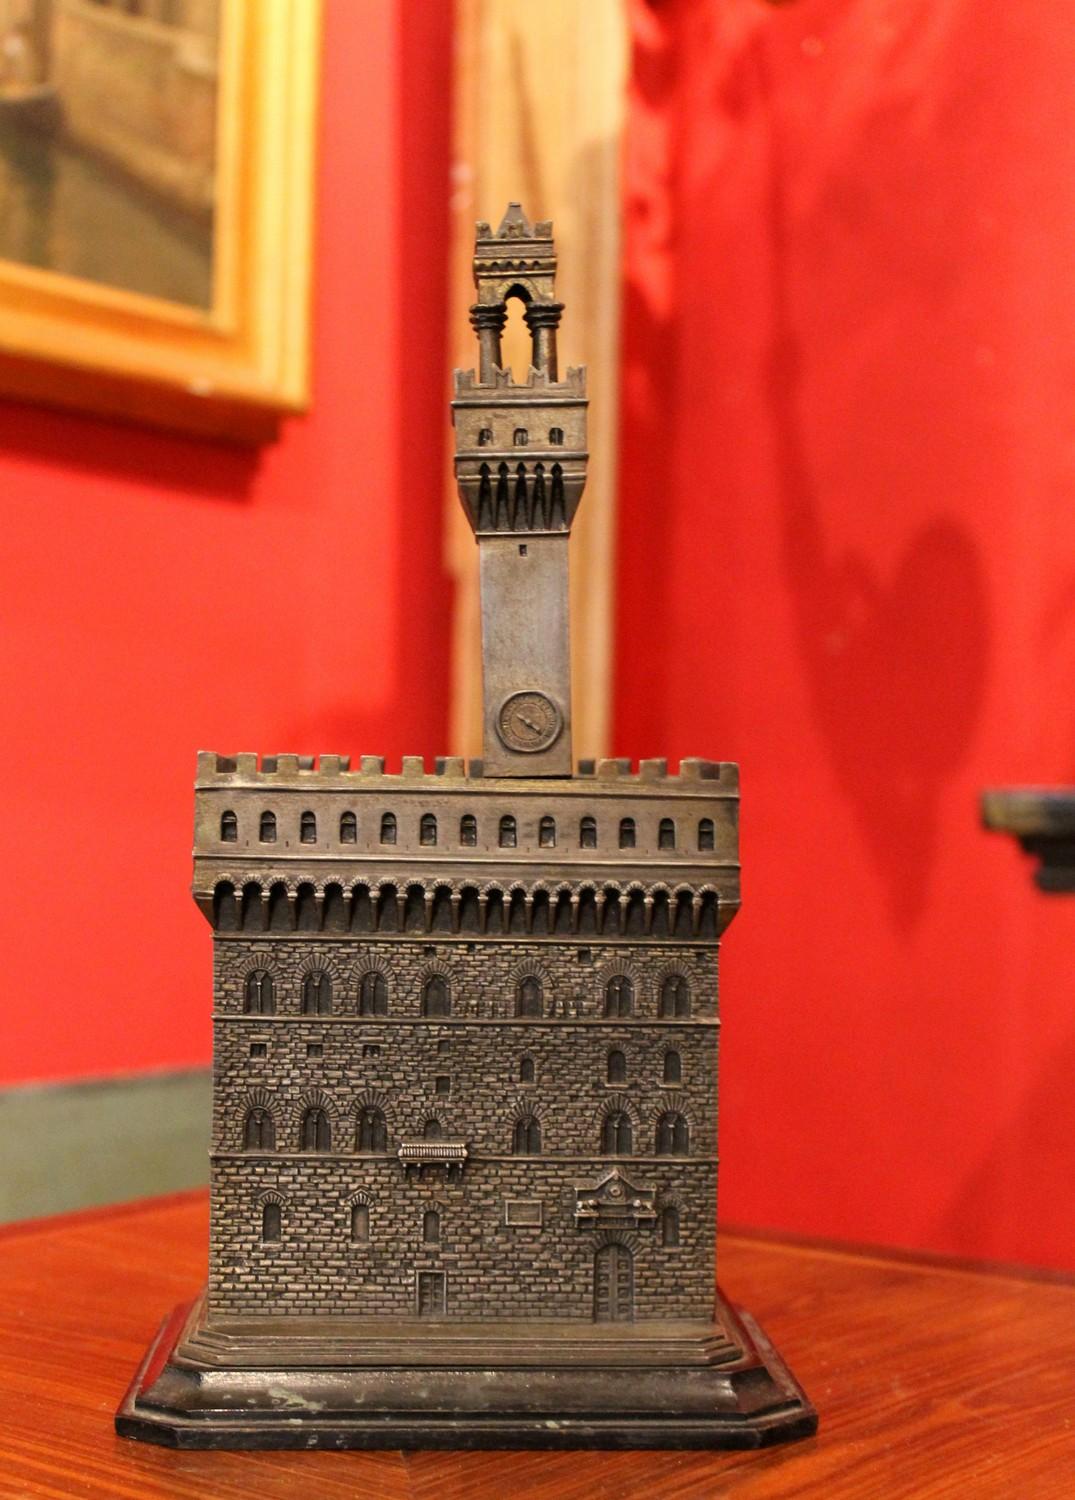 This beautiful early 20th century box is worked in the round and faithfully represents the model of the famous Palazzo Vecchio in Florence. A generously sized and well detailed live like architectural model made of metal and burnished bronze with